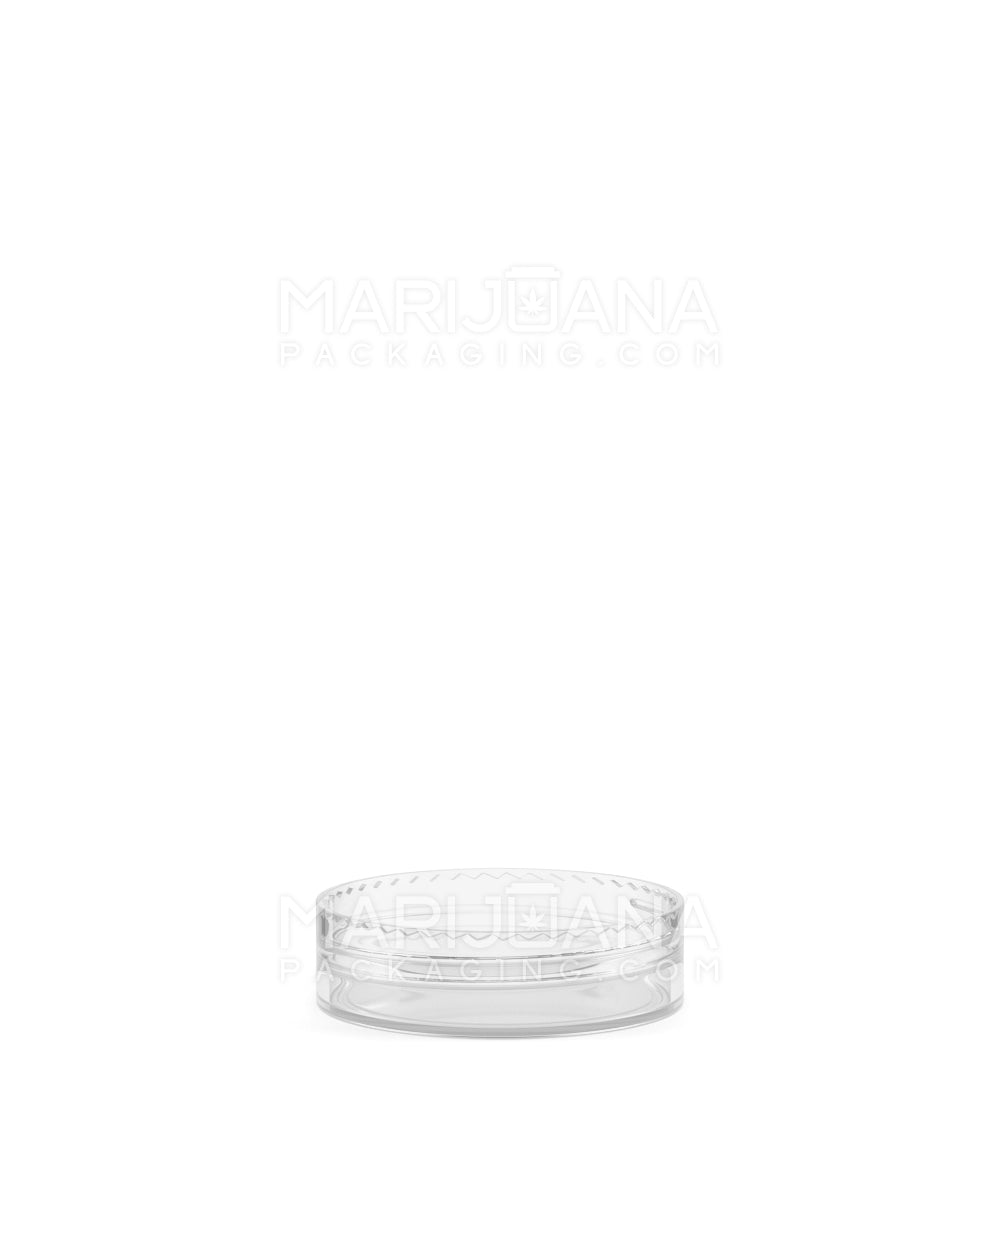 Clear Concentrate Containers w/ Screw Top Cap & White Silicone Insert | 7mL - Plastic | Sample - 13